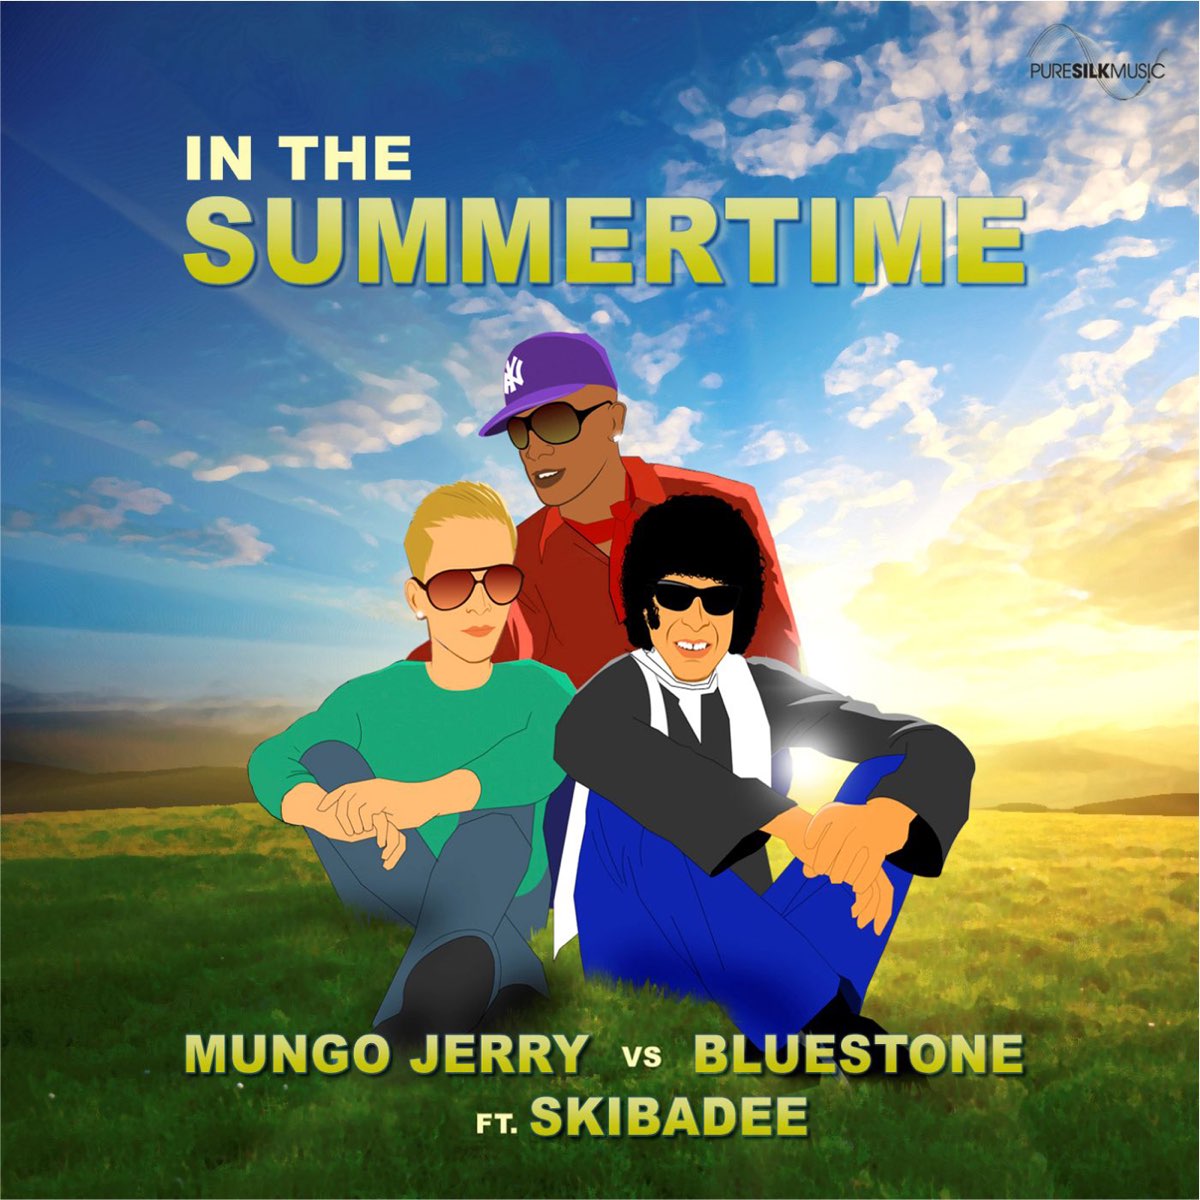 Mungo jerry in the summertime. In the Summertime. Mungo Jerry 1981 - together again. Skibadee.